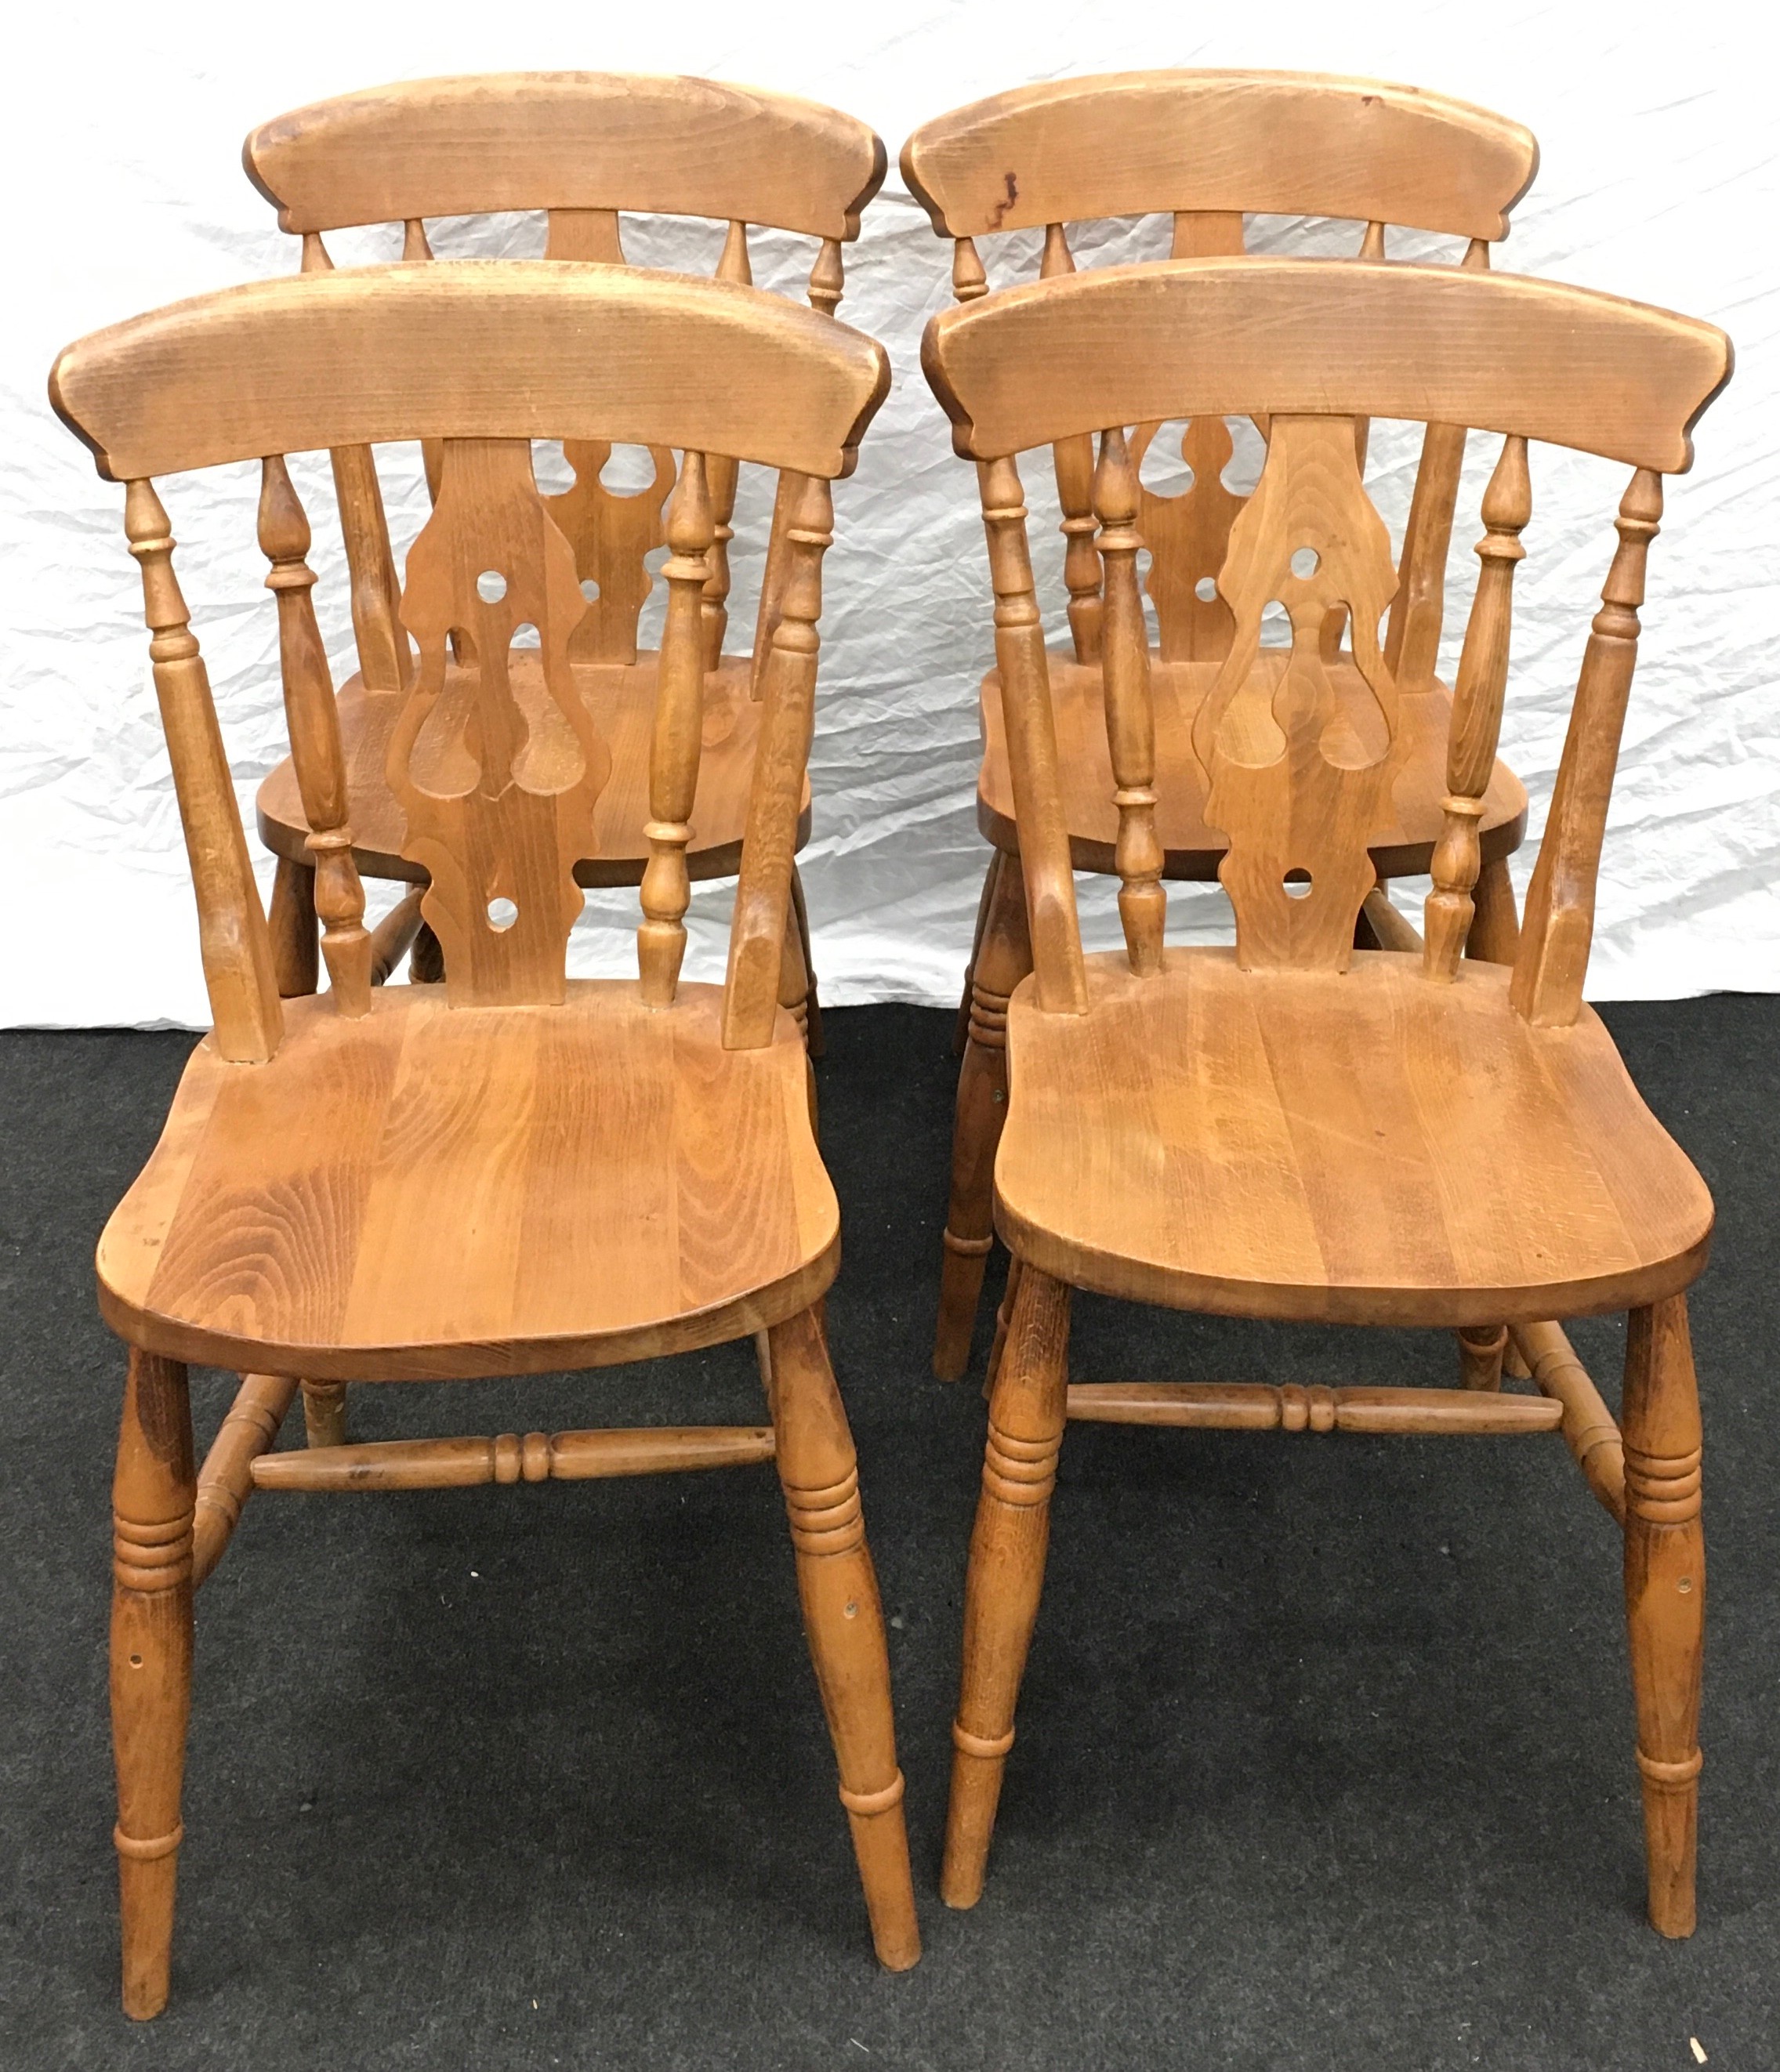 Set 4 elm seat farmhouse chairs with lira back on turned ring support and cross stretcher 90x45x45cm - Image 2 of 3